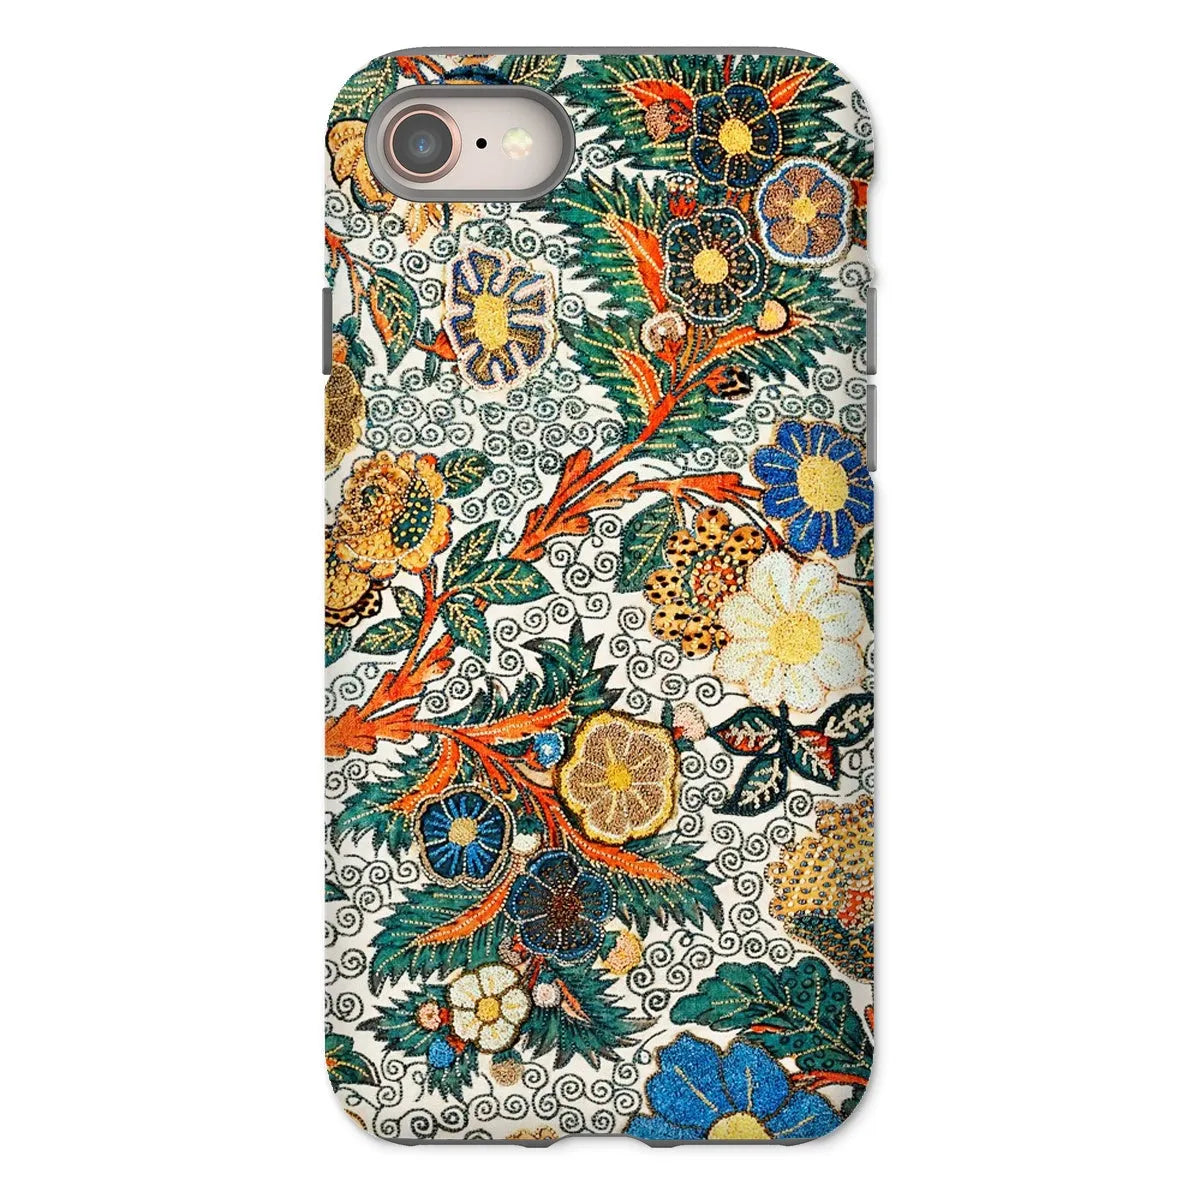 Blossomewhere Japanese Tapestry Art Phone Case - Iphone 8 / Matte - Mobile Phone Cases - Aesthetic Art